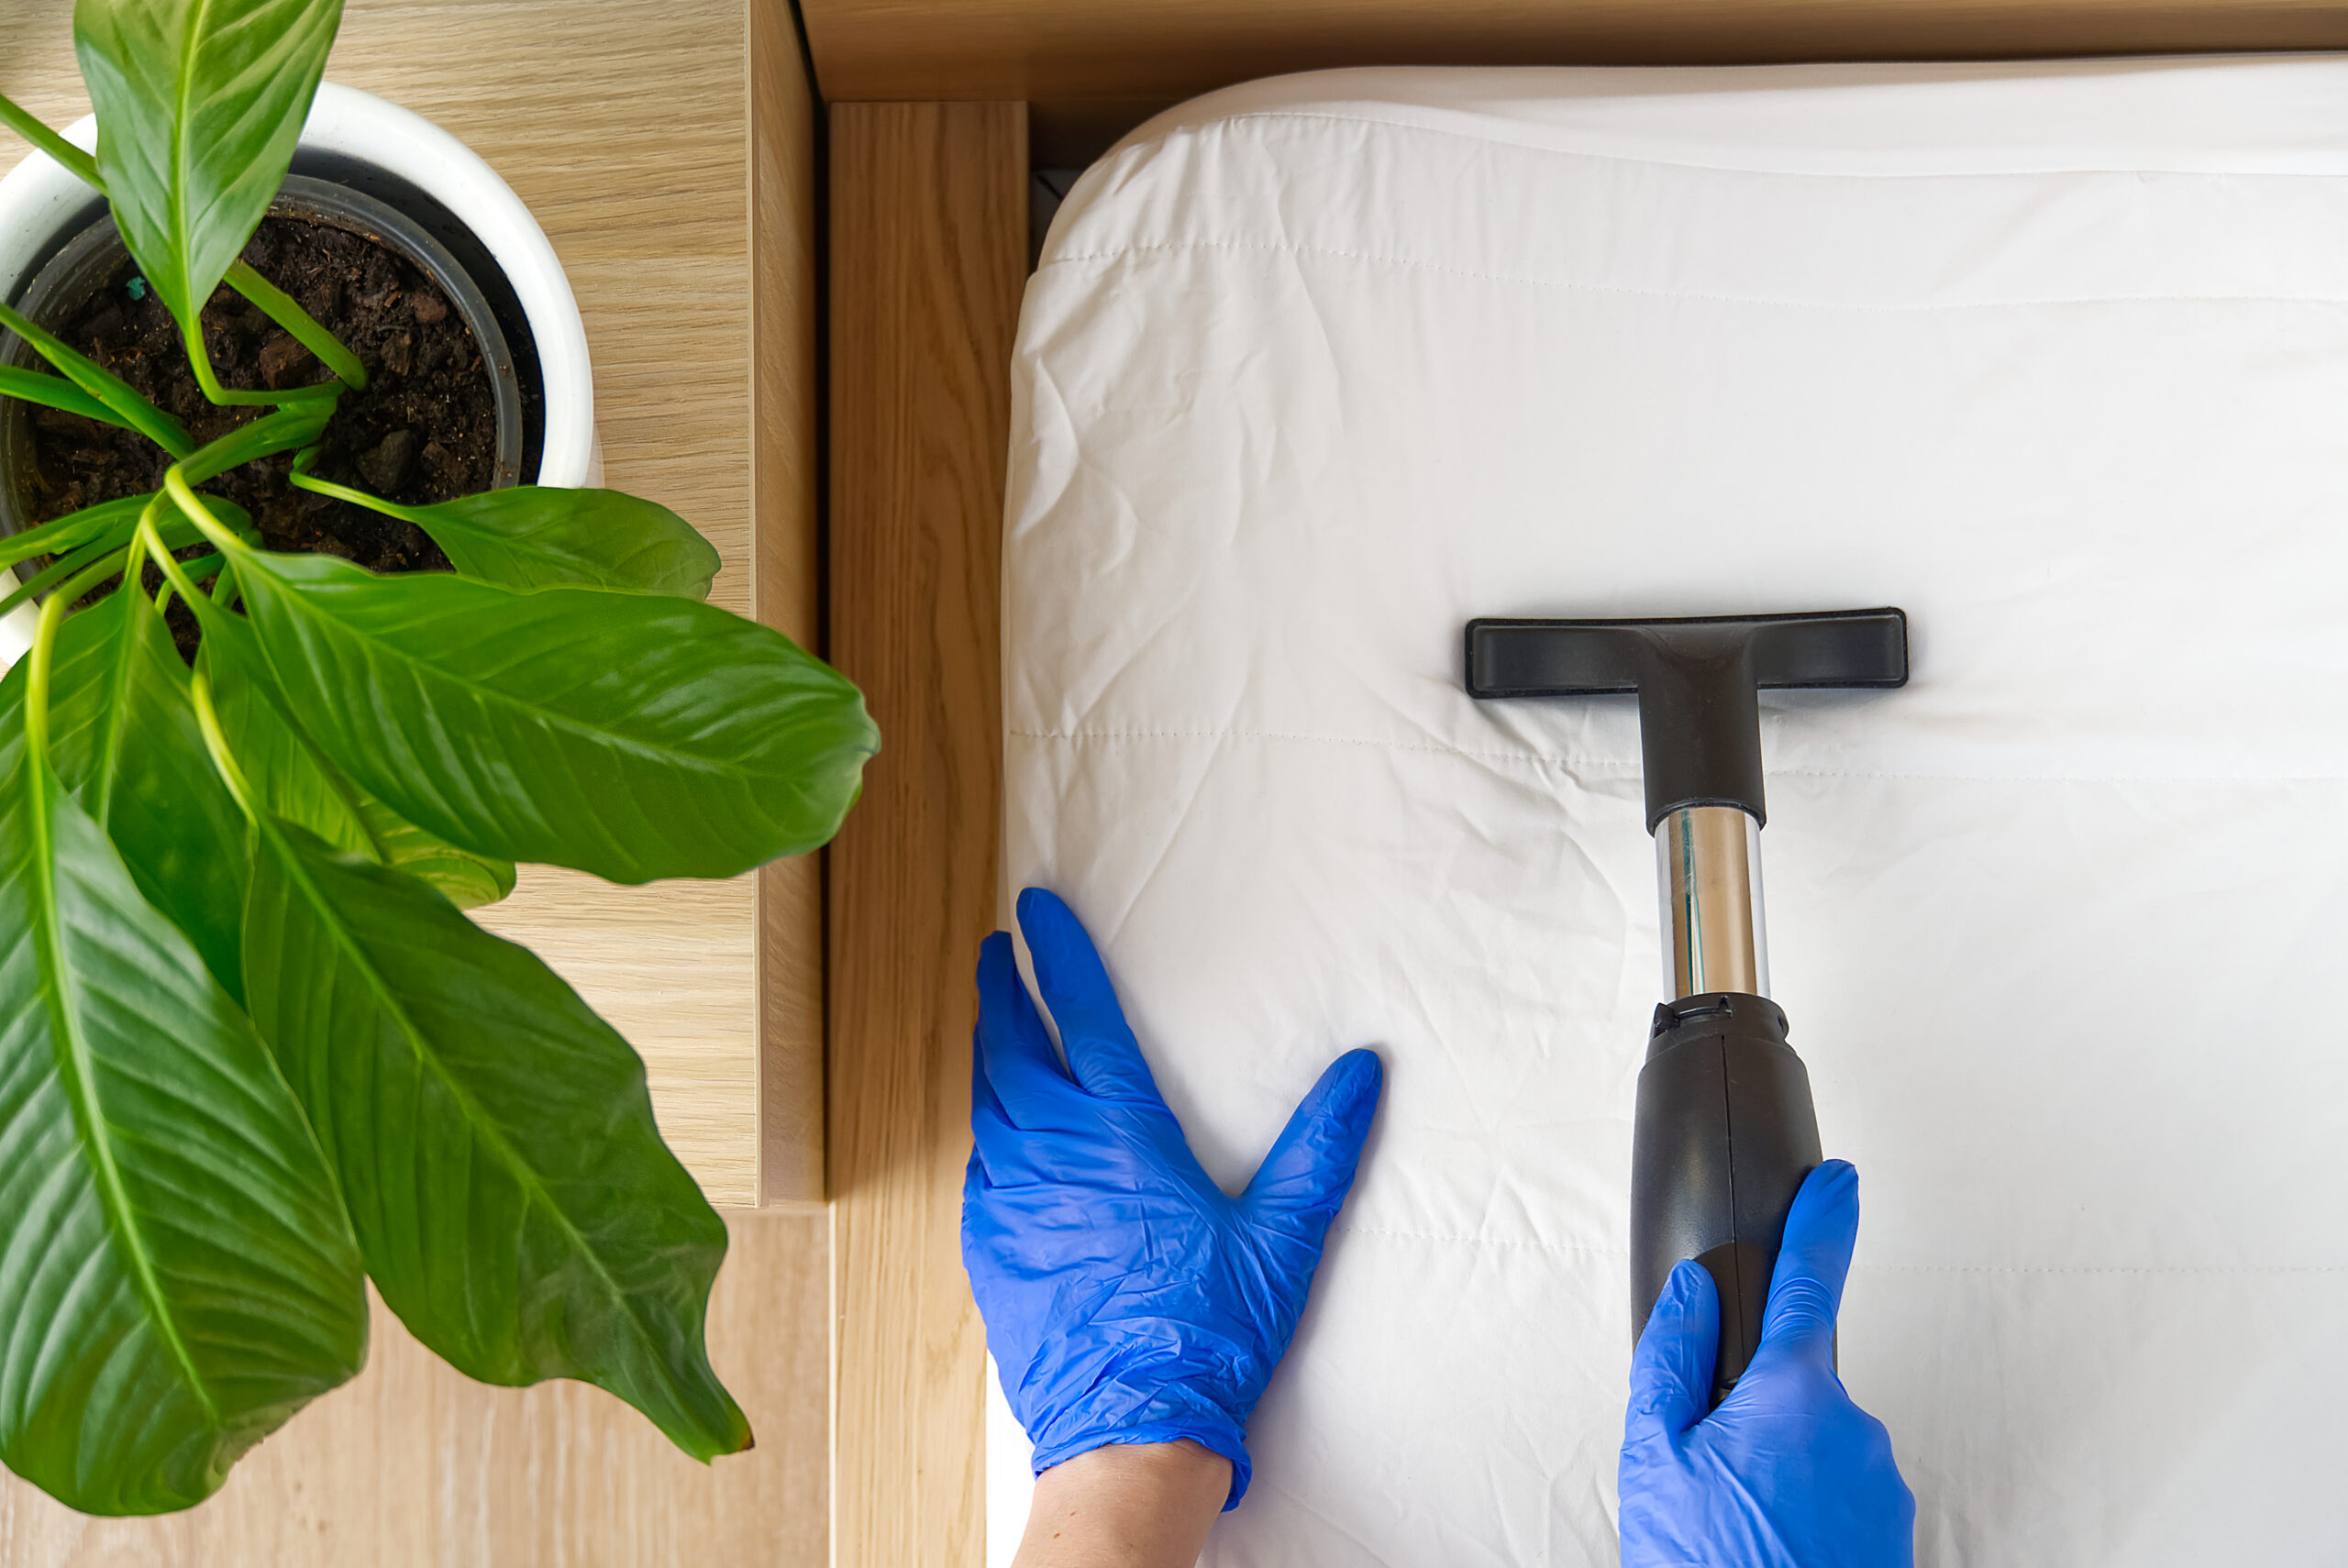 Vaccuuming a Bed - Domestic Home Cleaning | March 2022 Issue - Free Christian Lifestyle Magazine | Nashville Christian Family Magazine